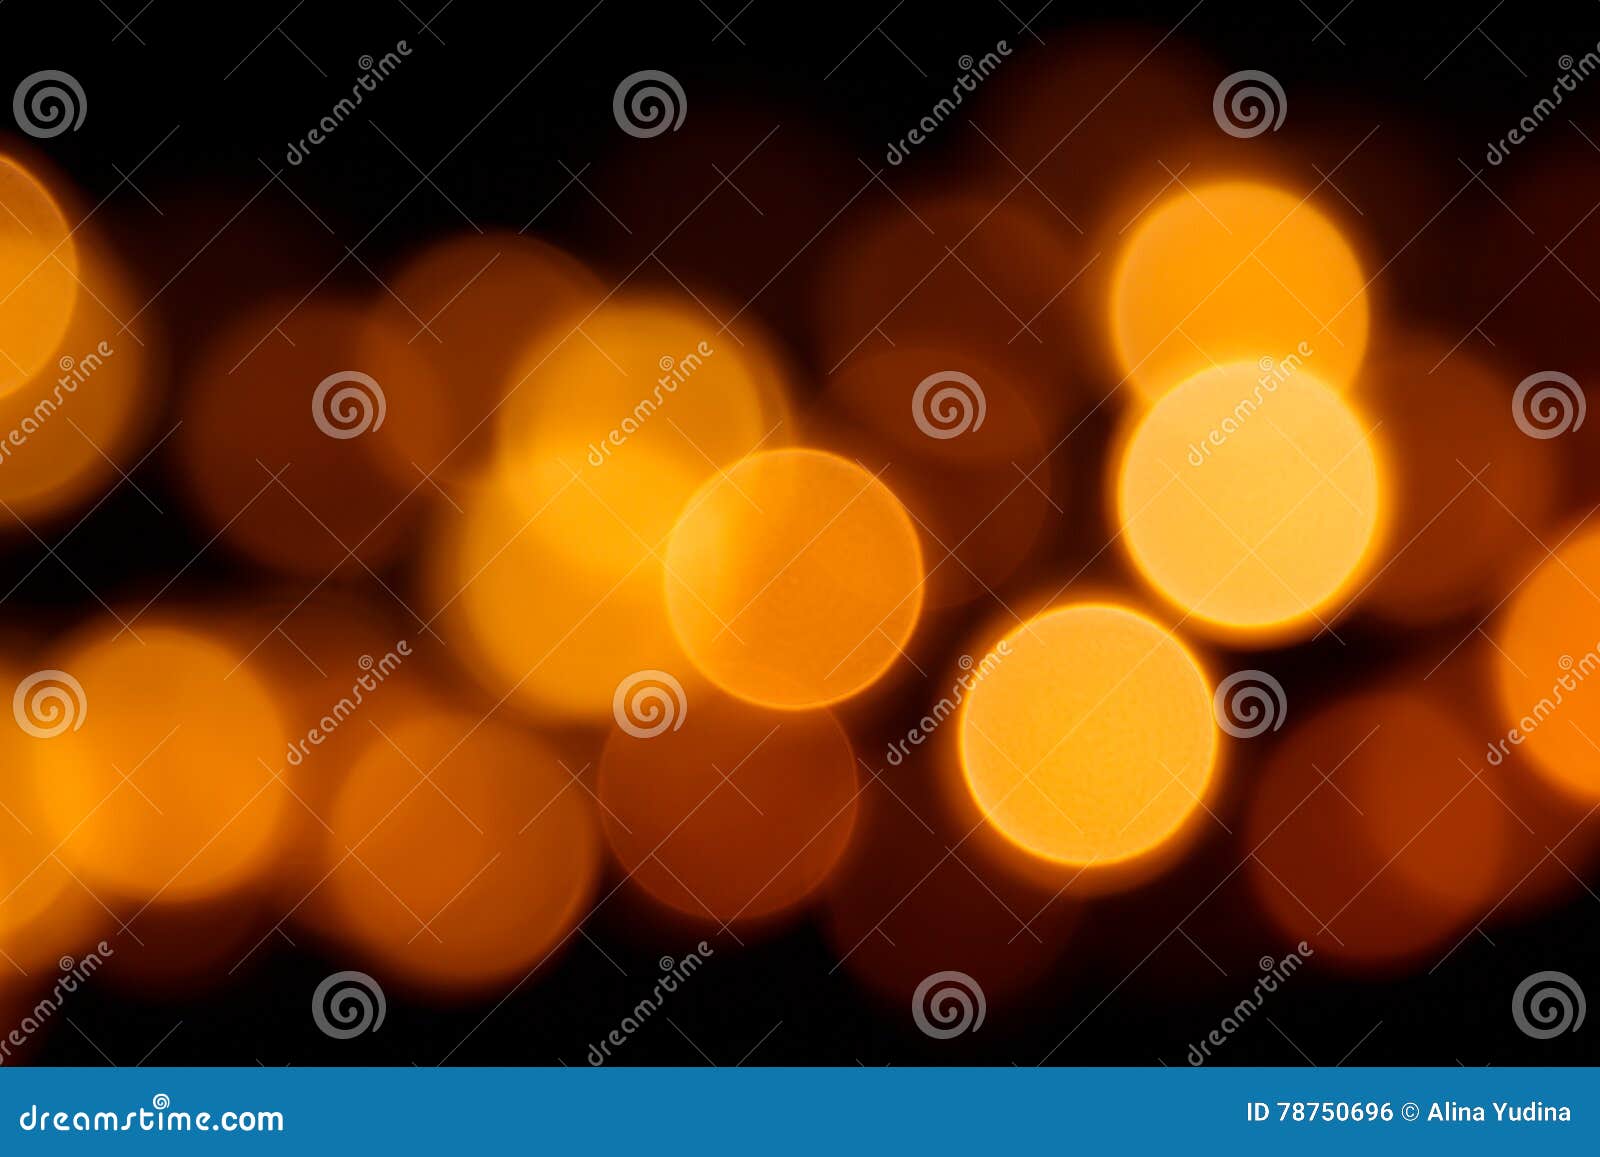 A black background with a bunch of yellow circles photo – Free